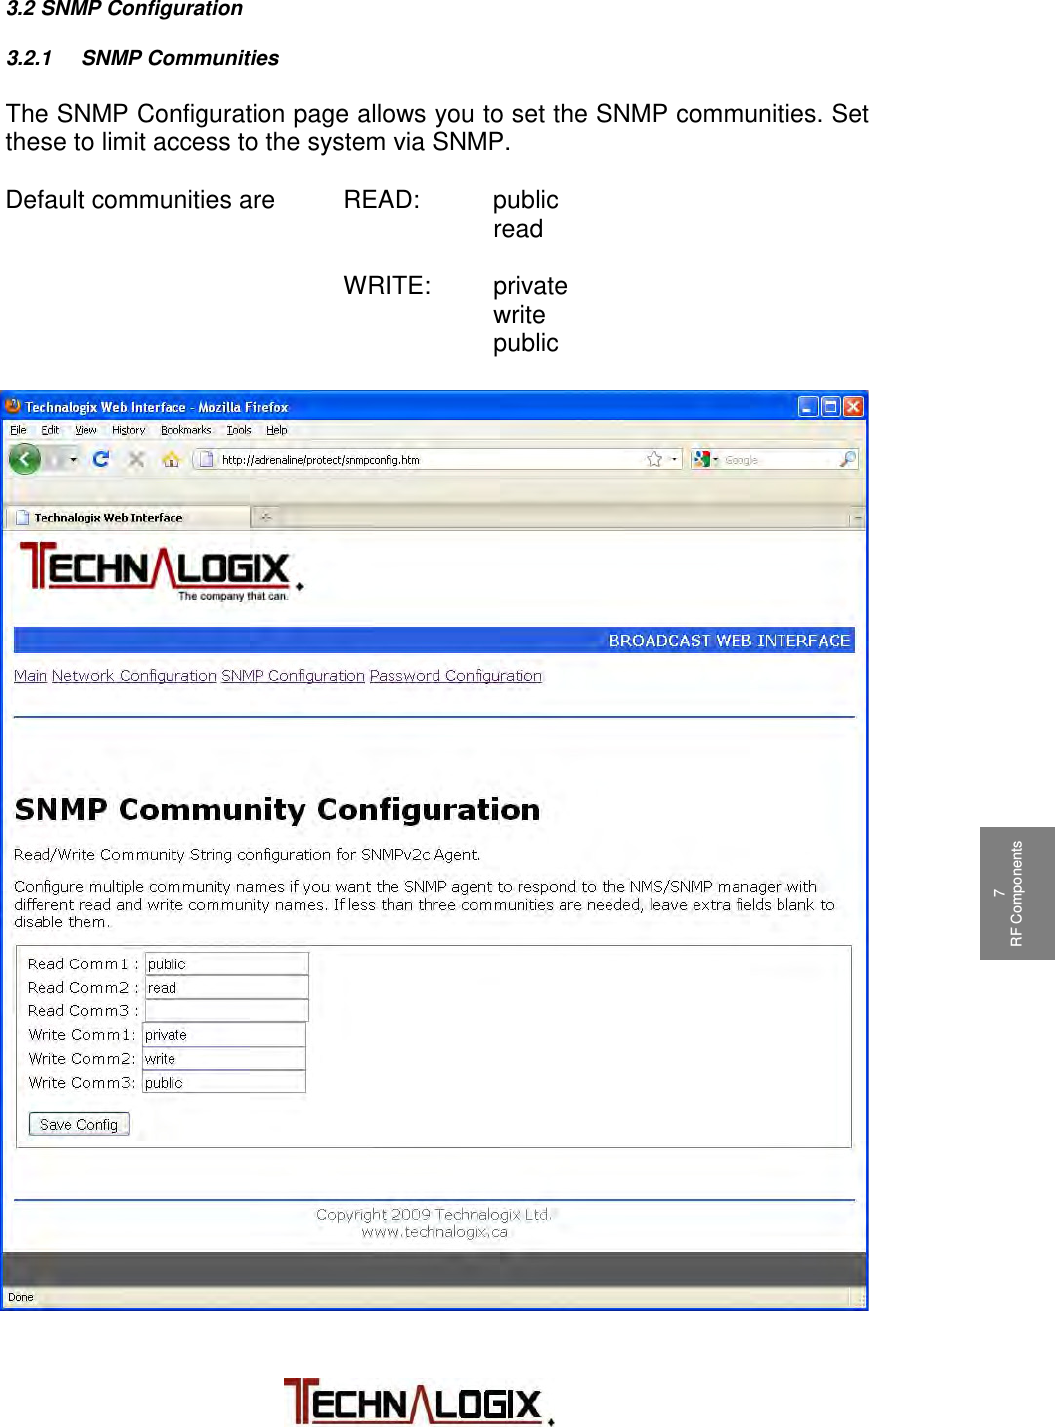           1 Safeguards  2 Terms and Warranty 3 Principle of Operation 4 Installation 5 Operation 6 Control System 7 RF Components 7 RF Components 9 Maintenance 10 Troubleshooting  3.2 SNMP Configuration  3.2.1 SNMP Communities  The SNMP Configuration page allows you to set the SNMP communities. Set these to limit access to the system via SNMP.    Default communities are   READ: public        read           WRITE: private        write        public 